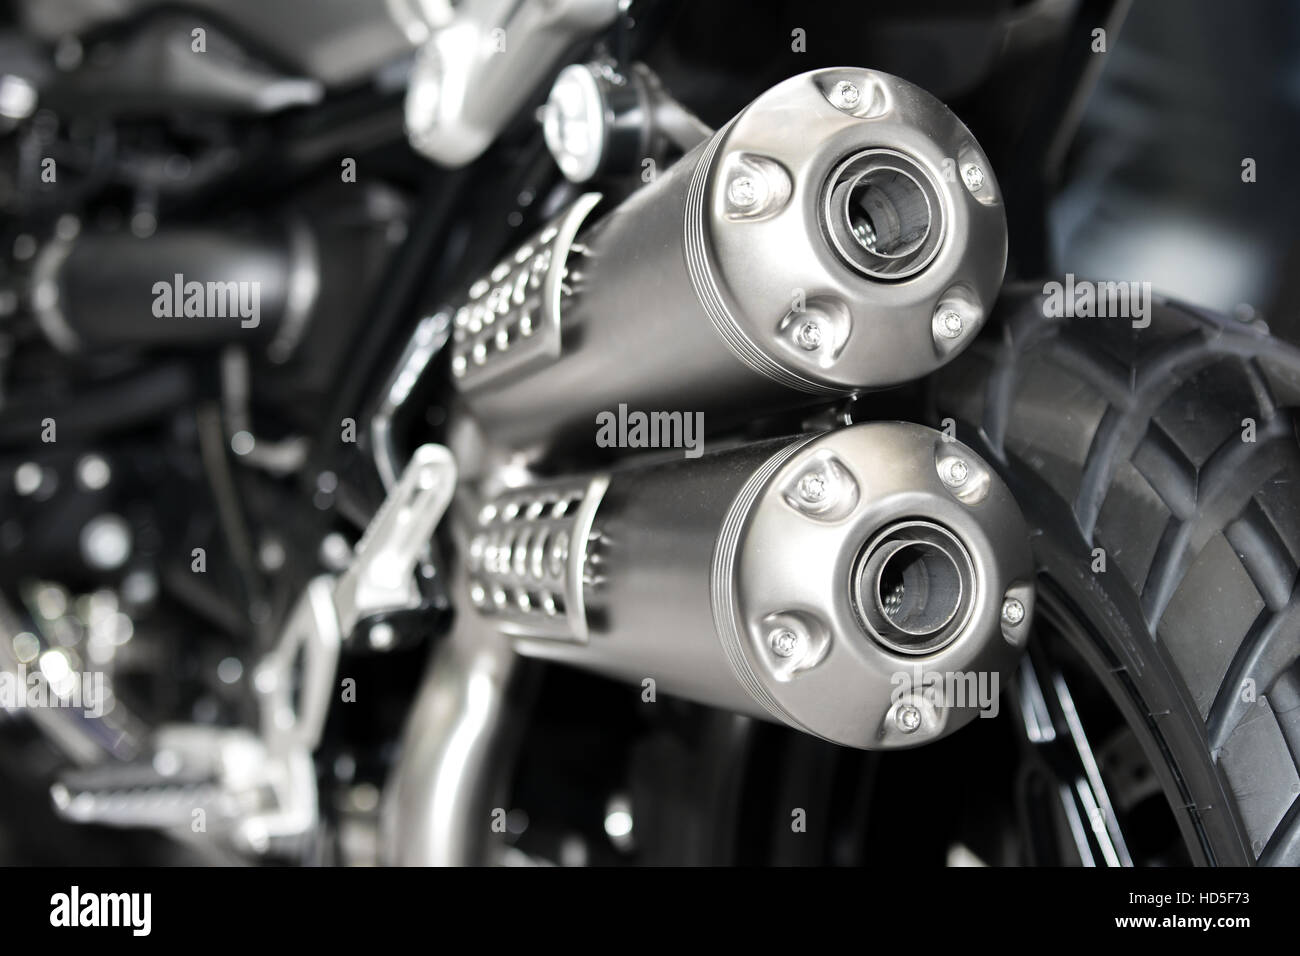 Closeup of exhaust or intake of racing motorcycle. Low angle photograph of motorcycle. Stock Photo